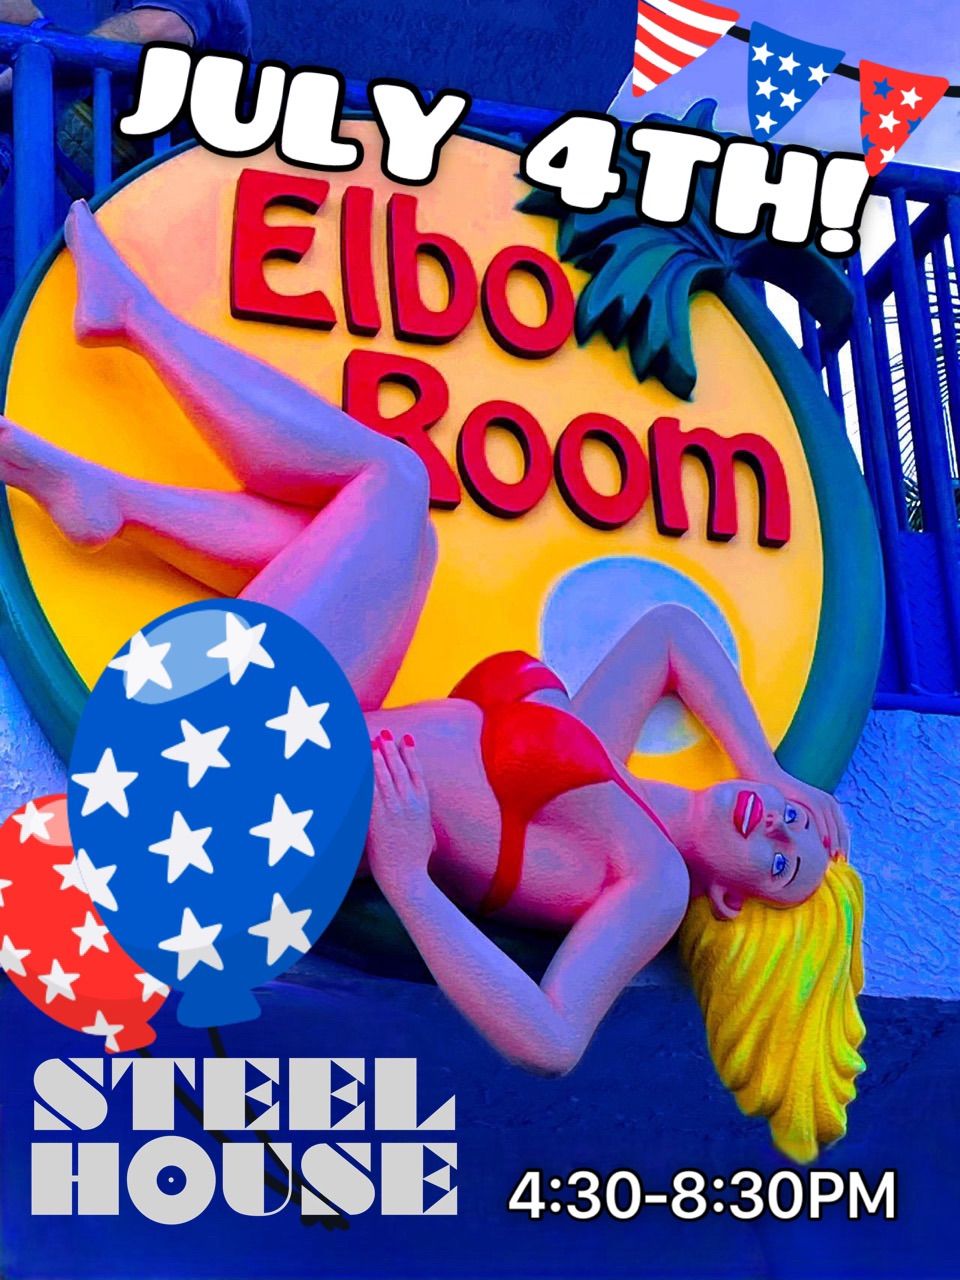 July 4th Rocks With SteelHouse At The World Famous Elbo Room!